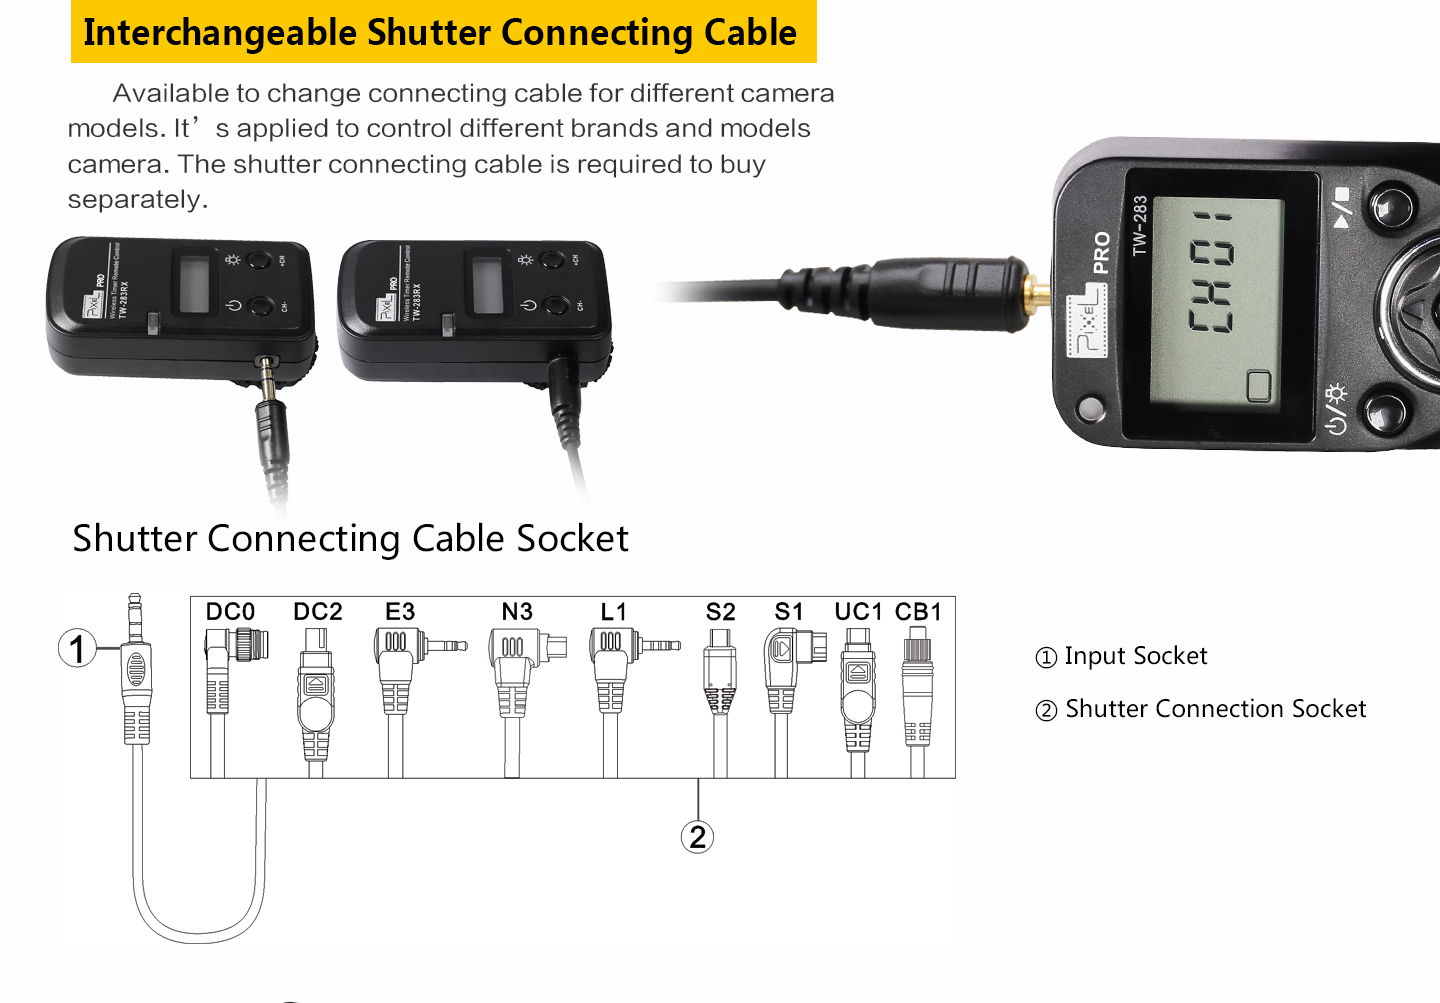 Interchangeable Shutter Connecting Cable